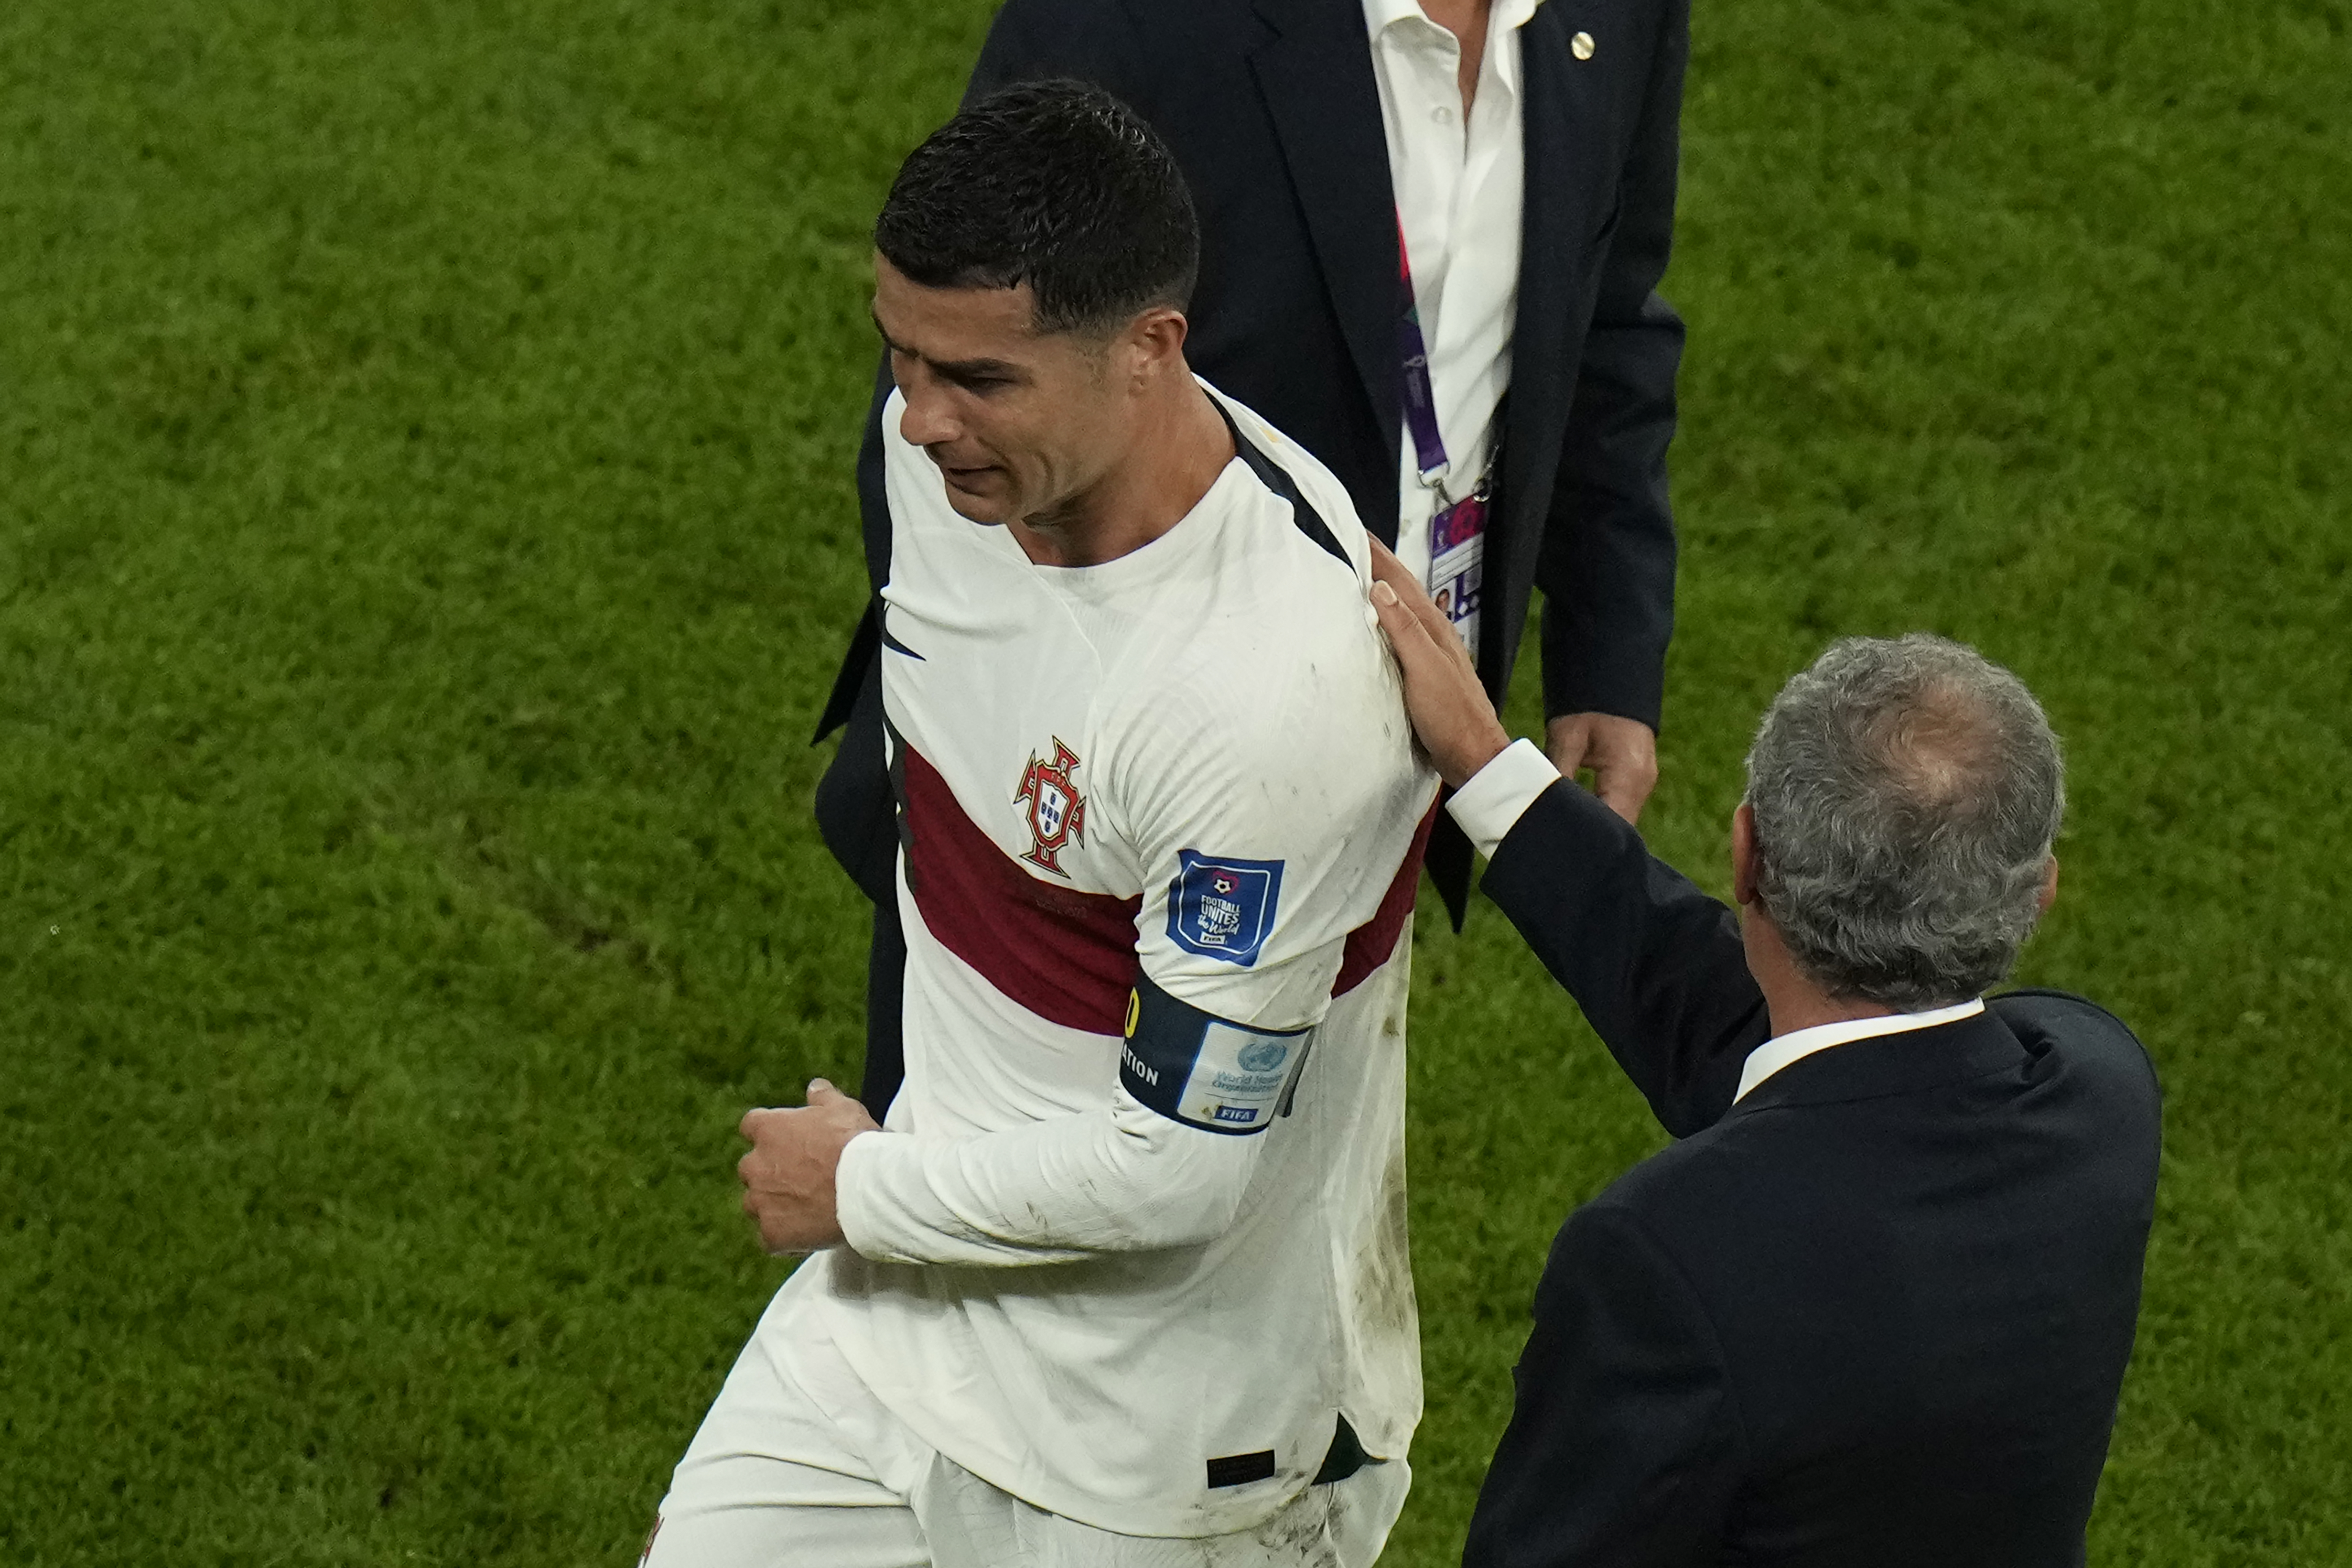 Ronaldo fails again in likely last chance to win World Cup